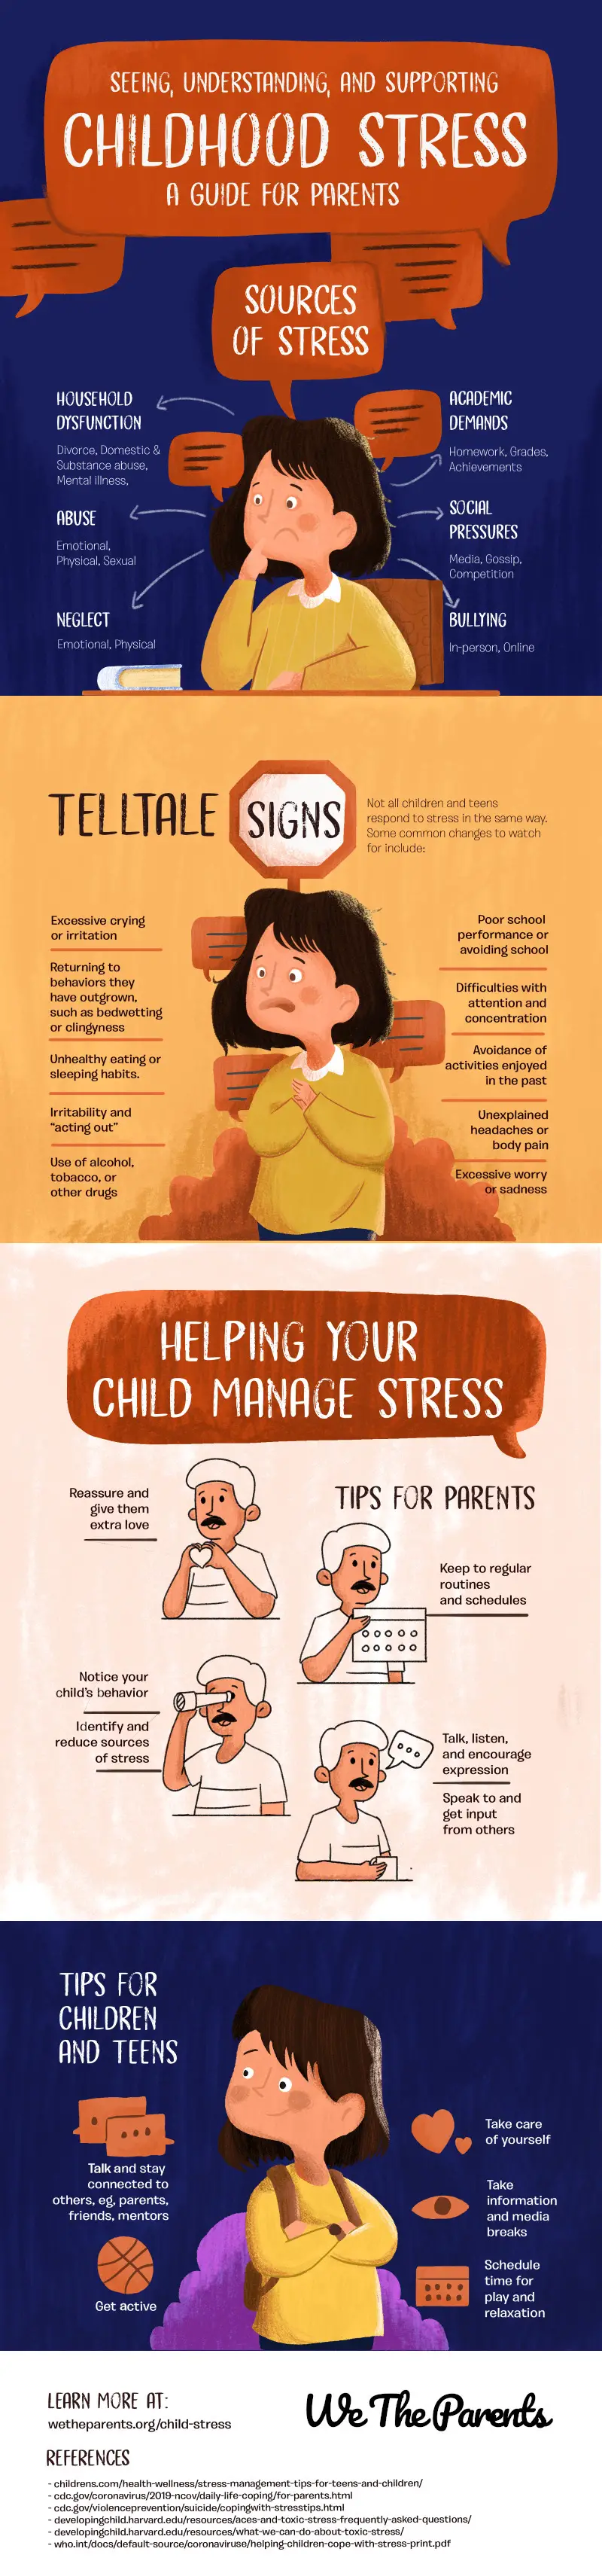 Childhood Stress - A Guide for Parents (Infographic)